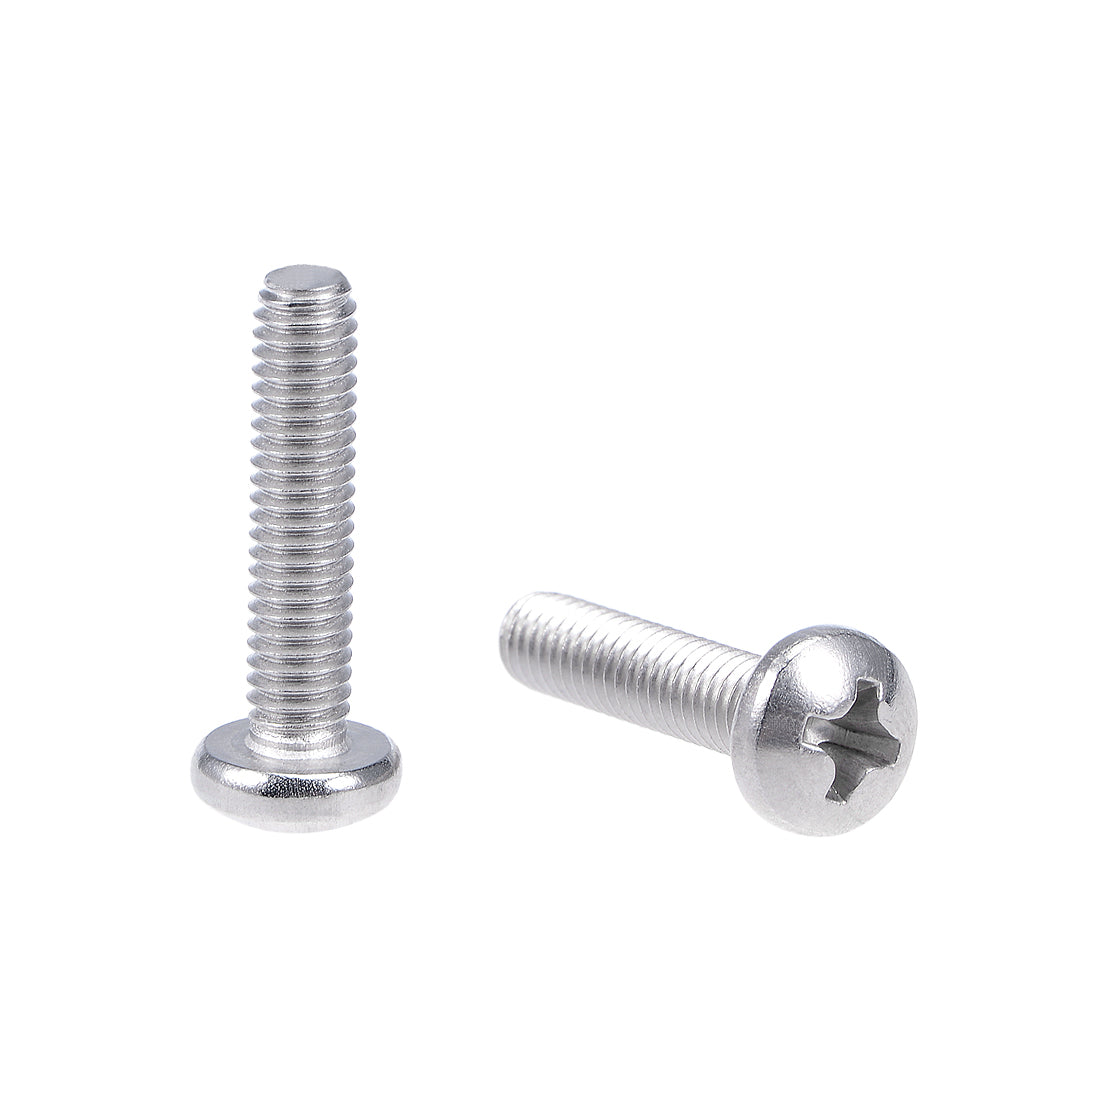 Uxcell Uxcell M3x8mm Machine Screws Pan Phillips Cross Head Screw 304 Stainless Steel Fasteners Bolts 60Pcs